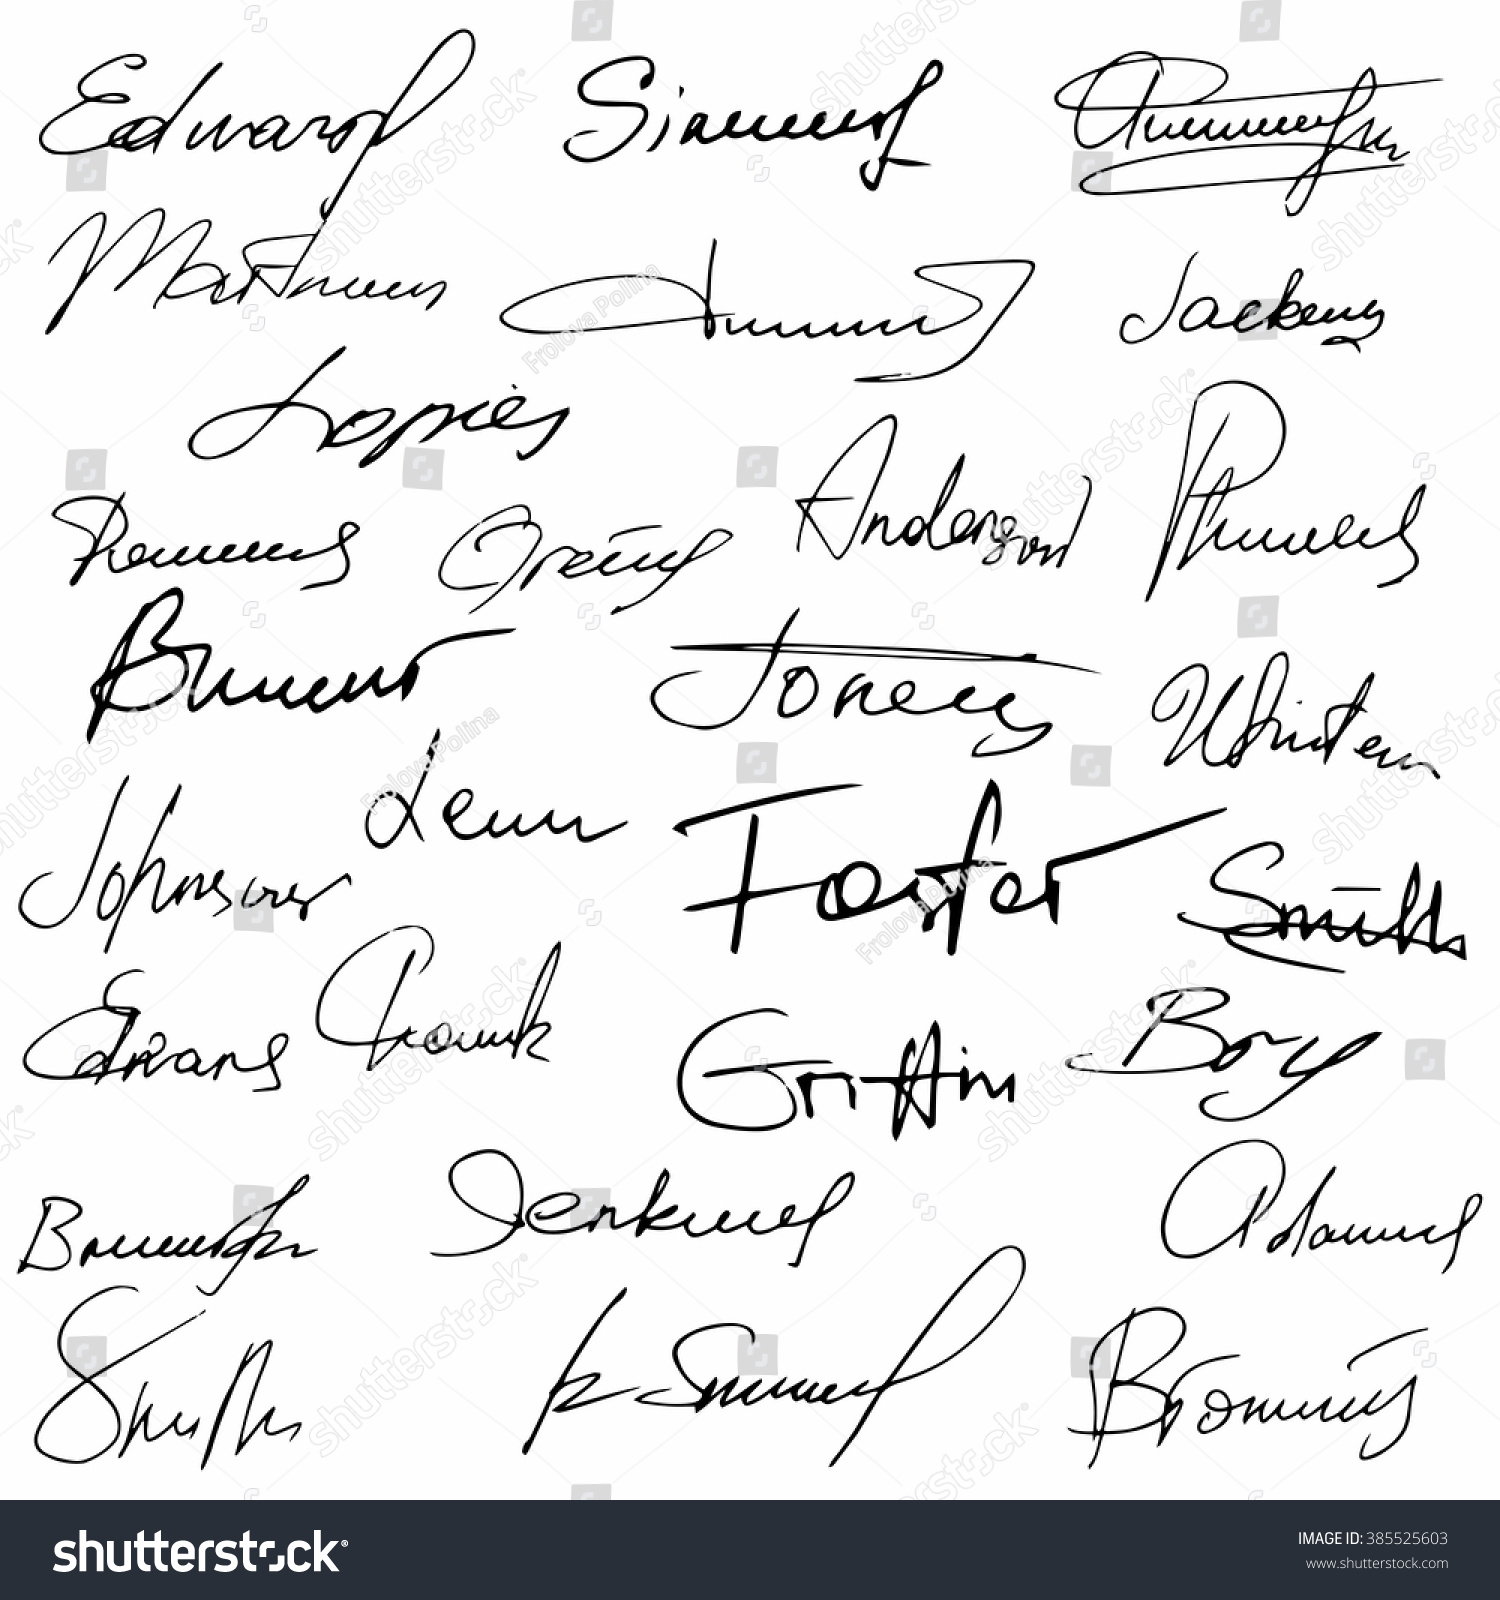 Signatures Set Fictitious Contract Signatures Business Stock Vector ...